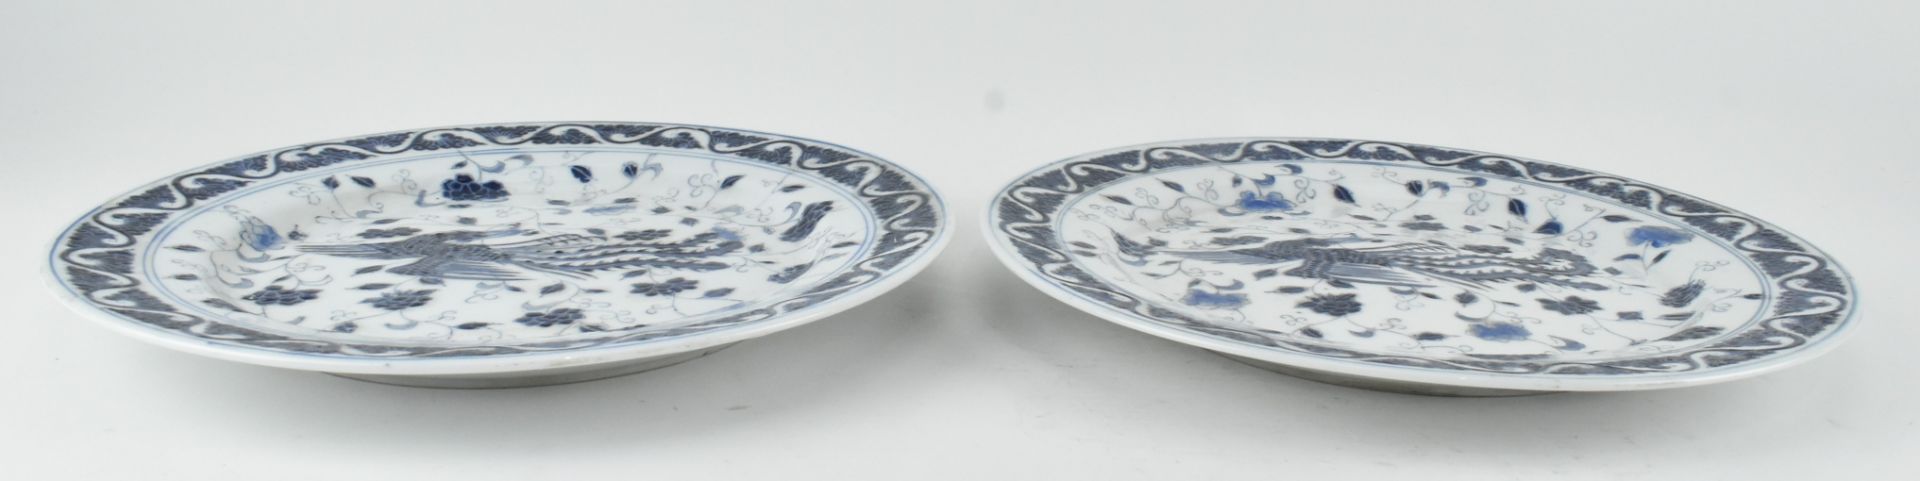 PAIR OF BLUE AND WHITE PHOENIX CHARGERS 晚清牡丹凤凰盘一对 - Image 4 of 6